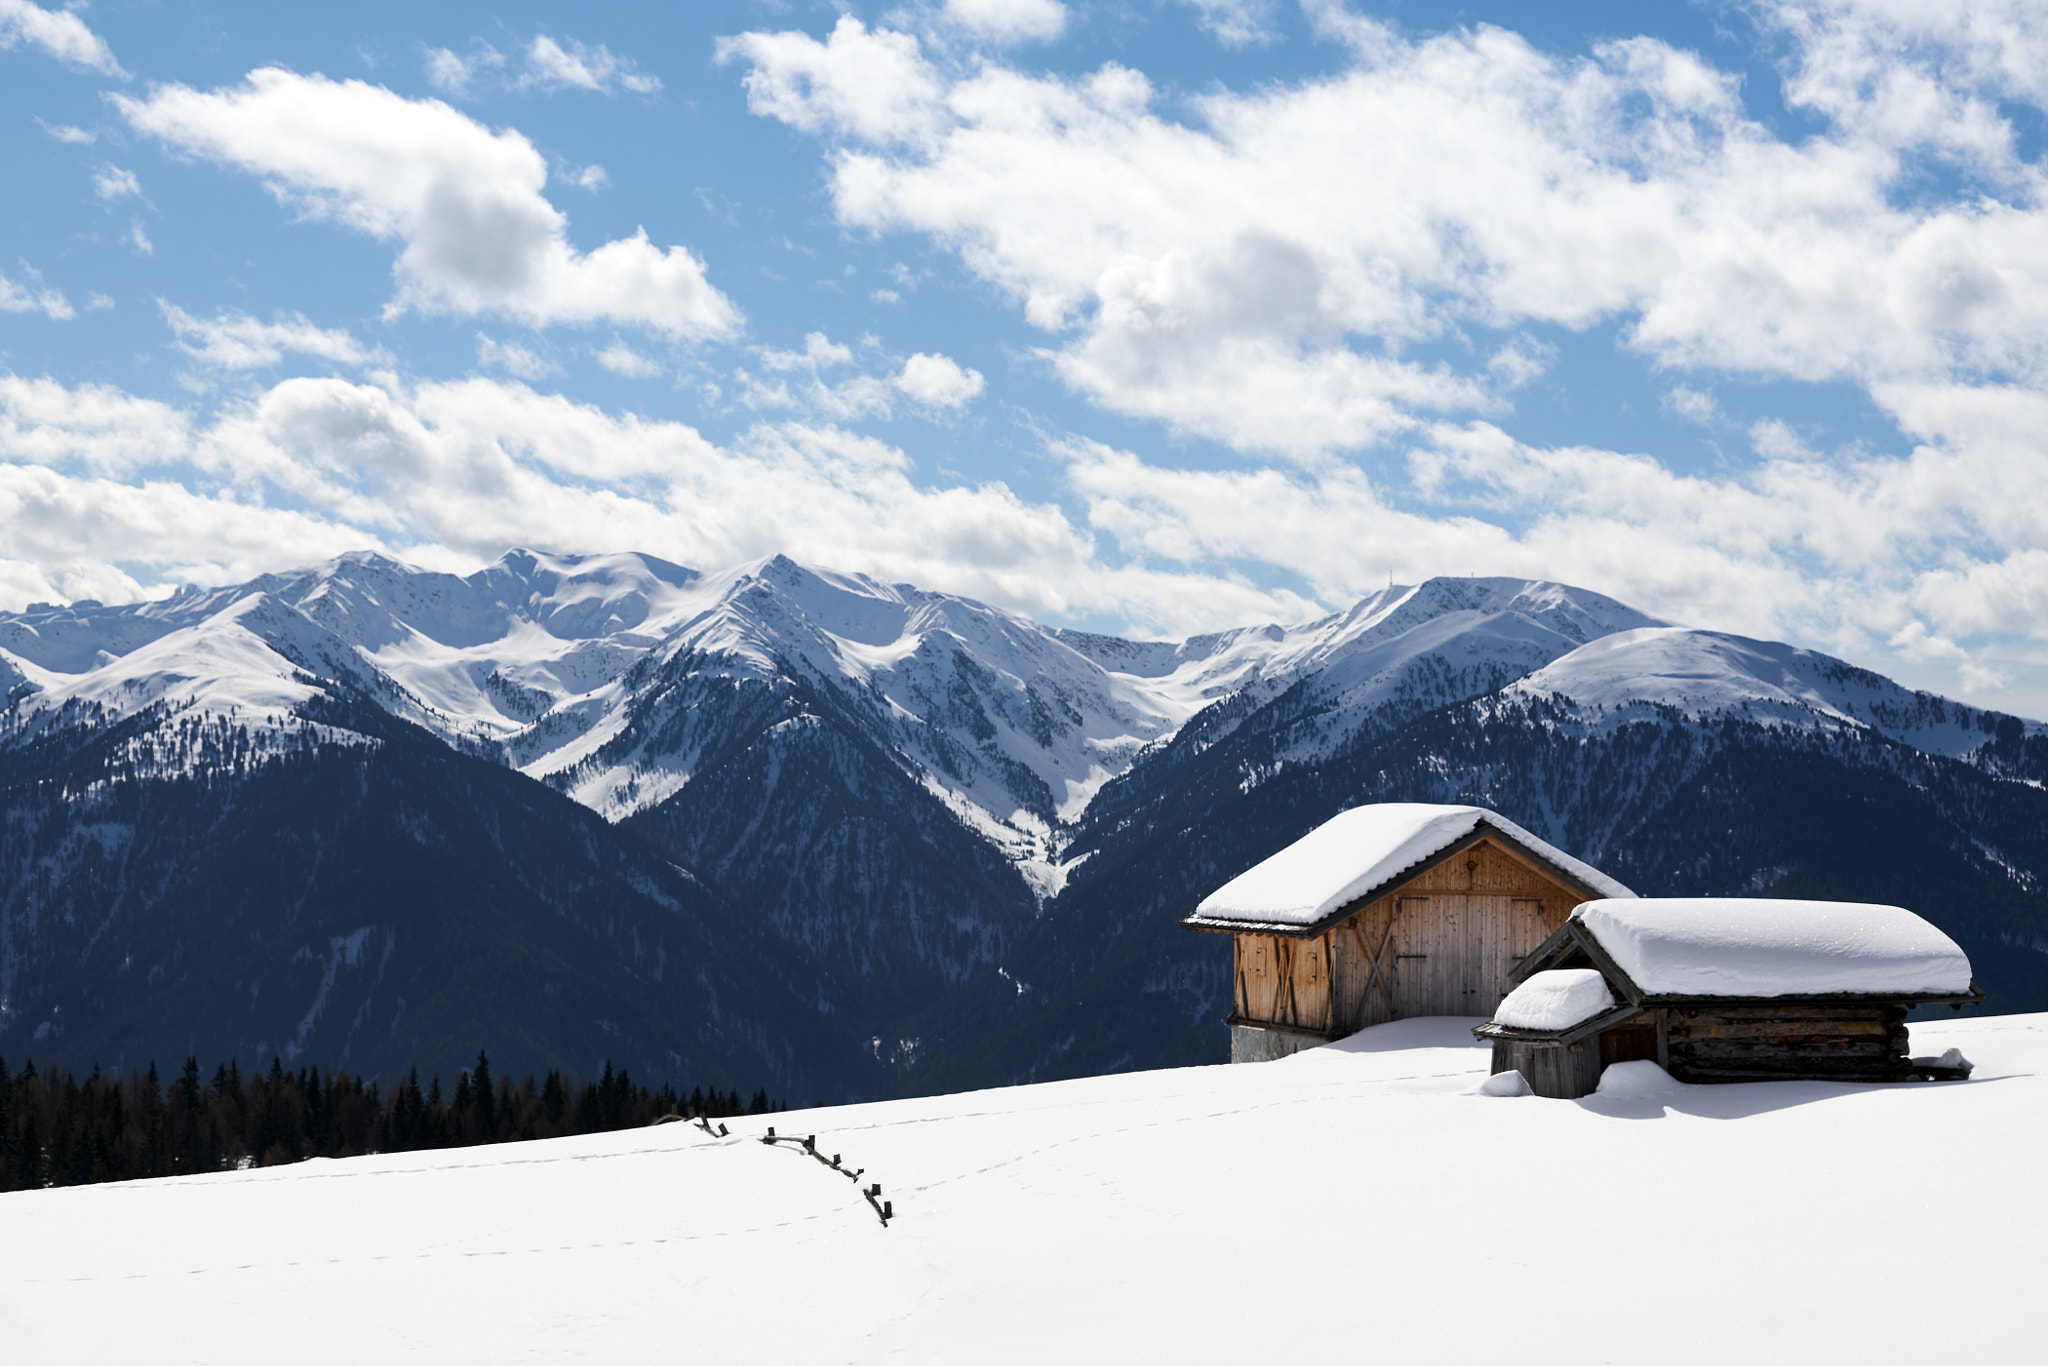 Sony a99 II sample photo. Two huts on rodenegger alm photography